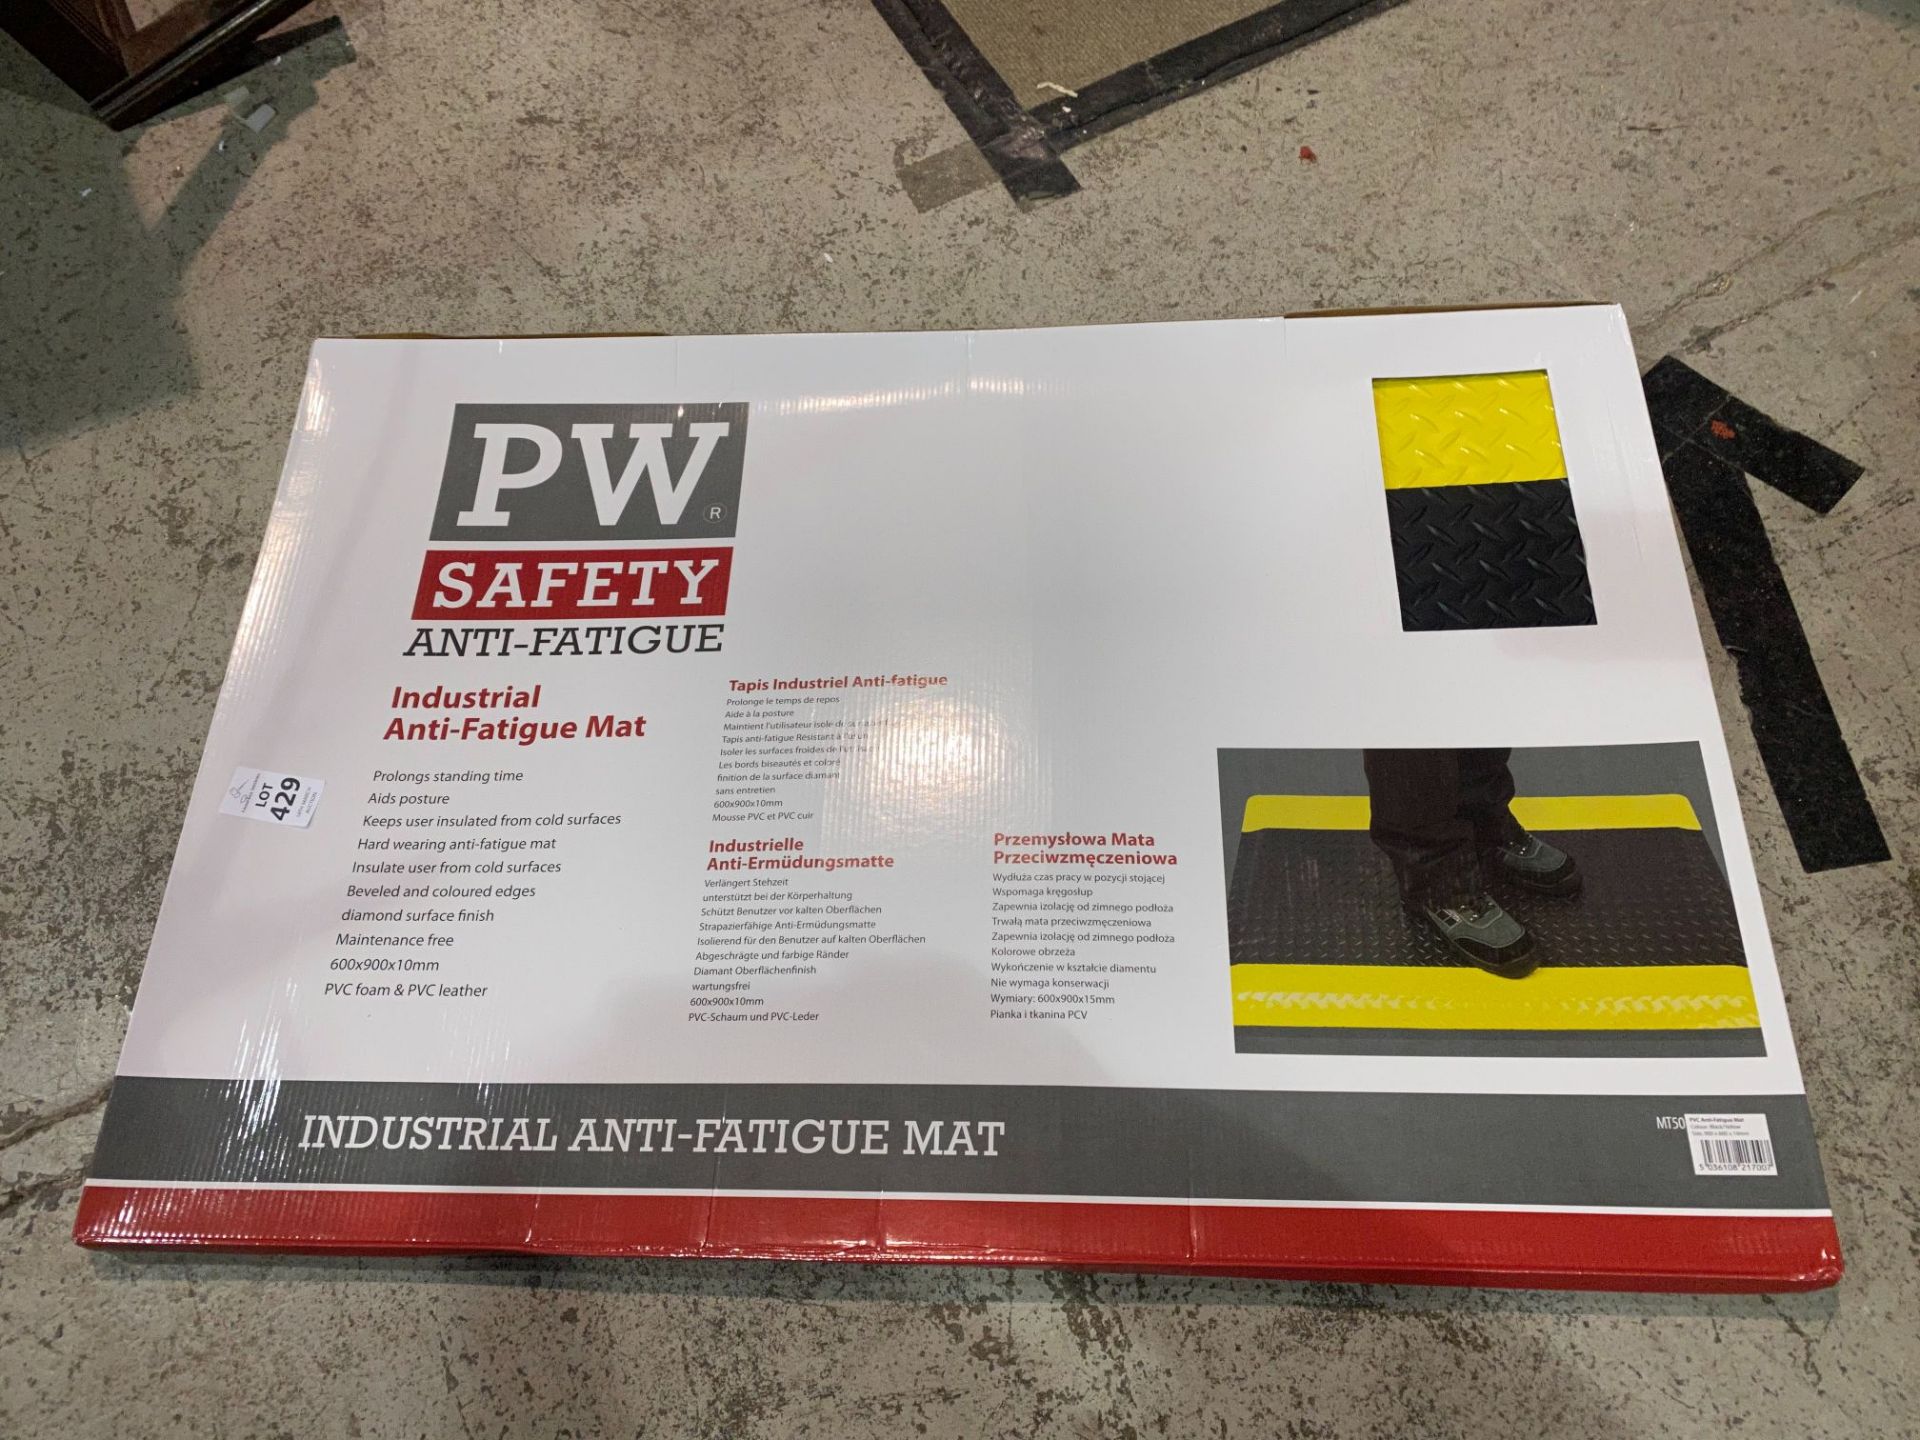 PW SAFETY INDUSTRIAL ANTI-FATIGUE MAT